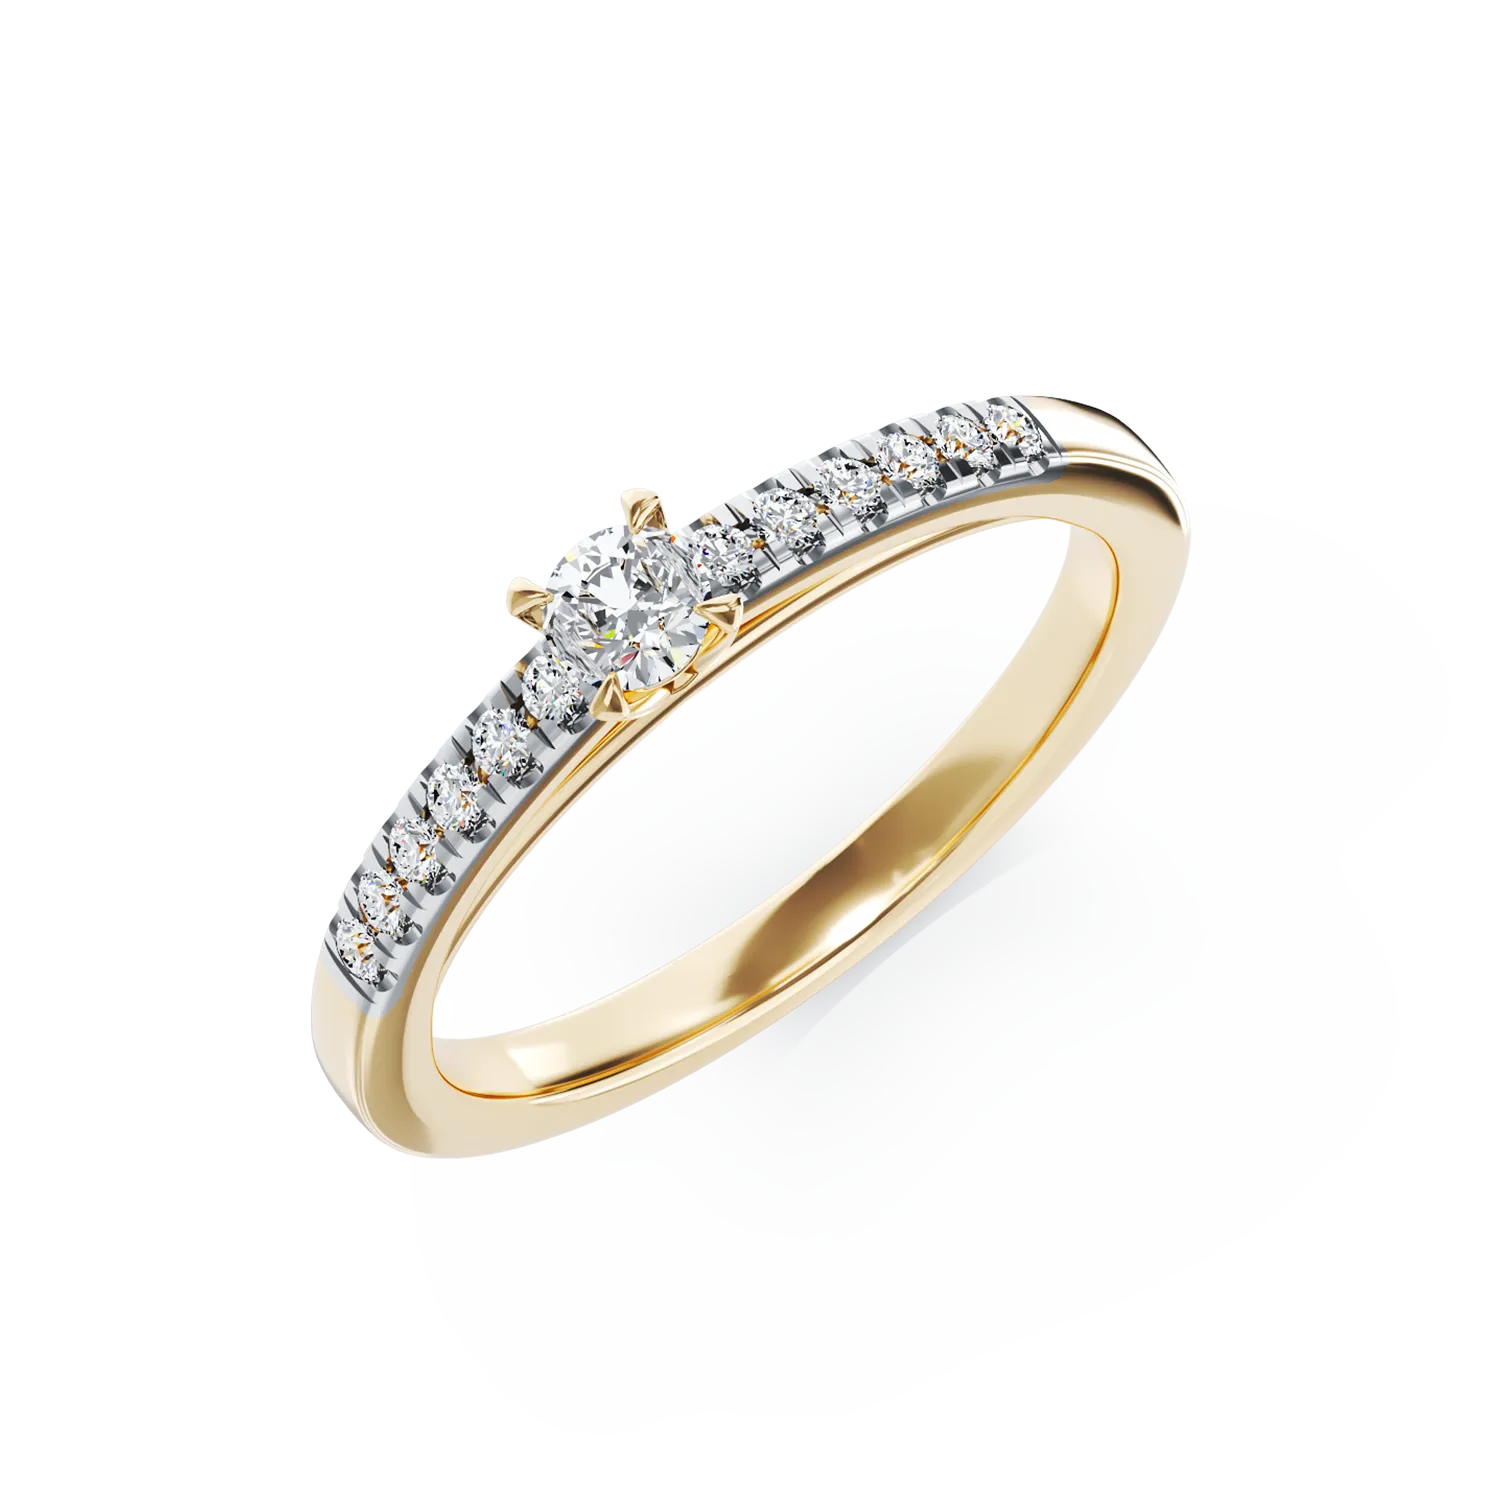 18K yellow gold engagement ring with 0.24ct diamond and 0.13ct diamonds